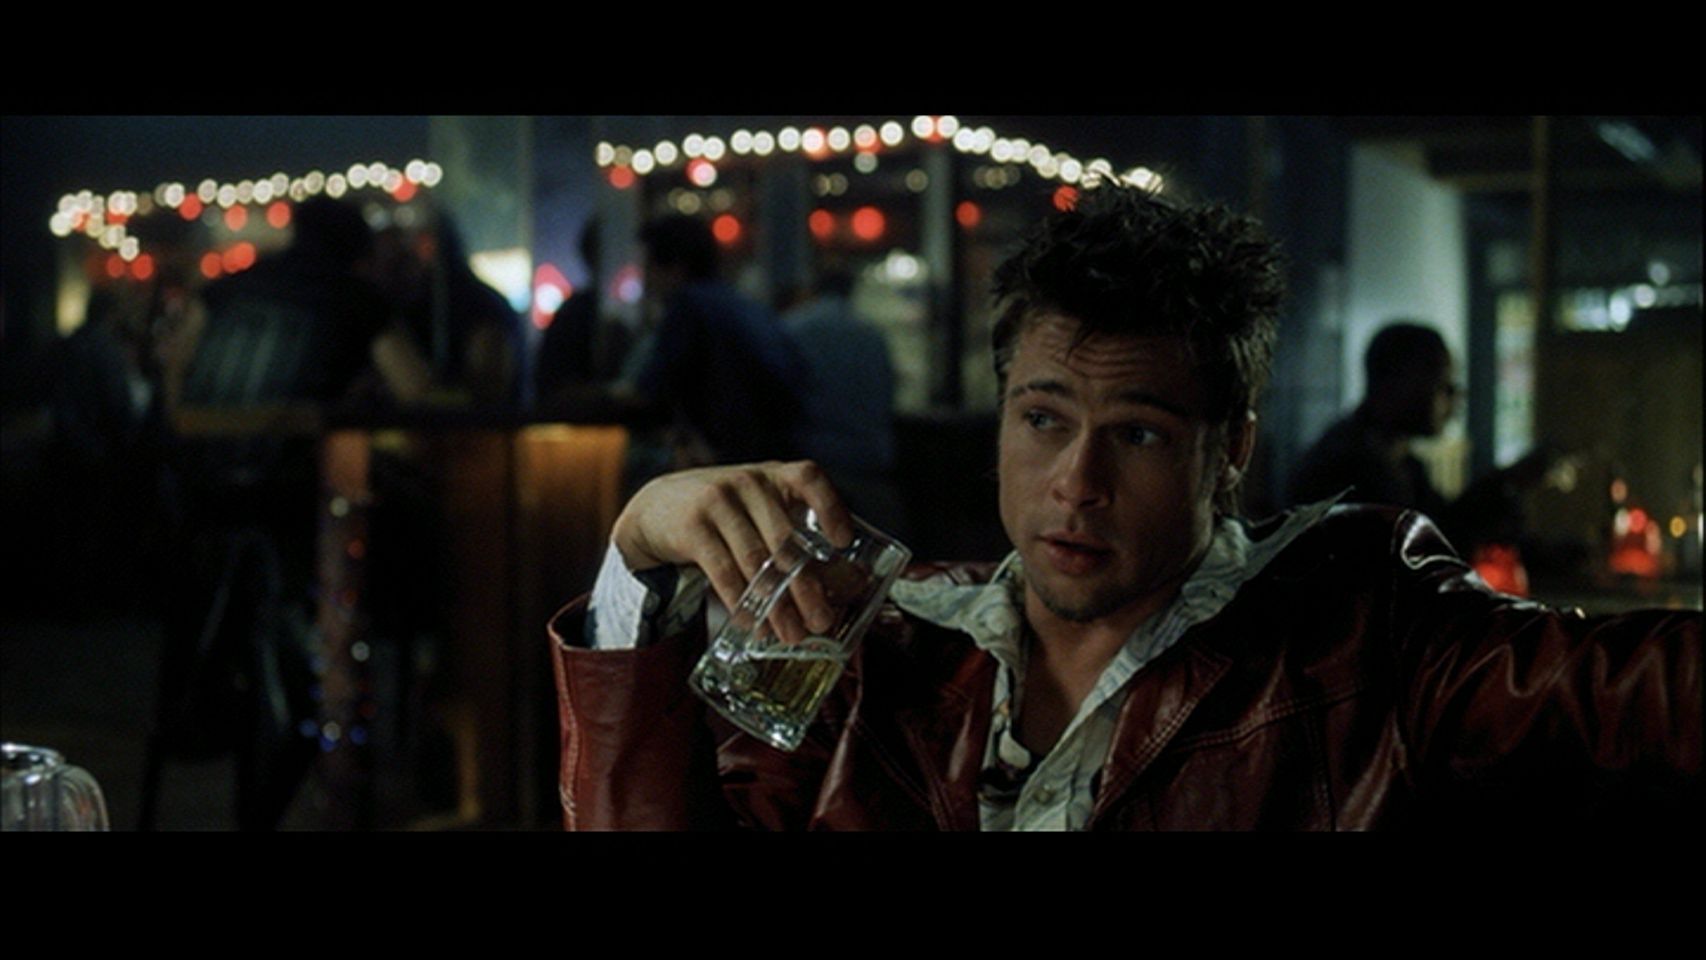 Fight Club Images on Fanpop.